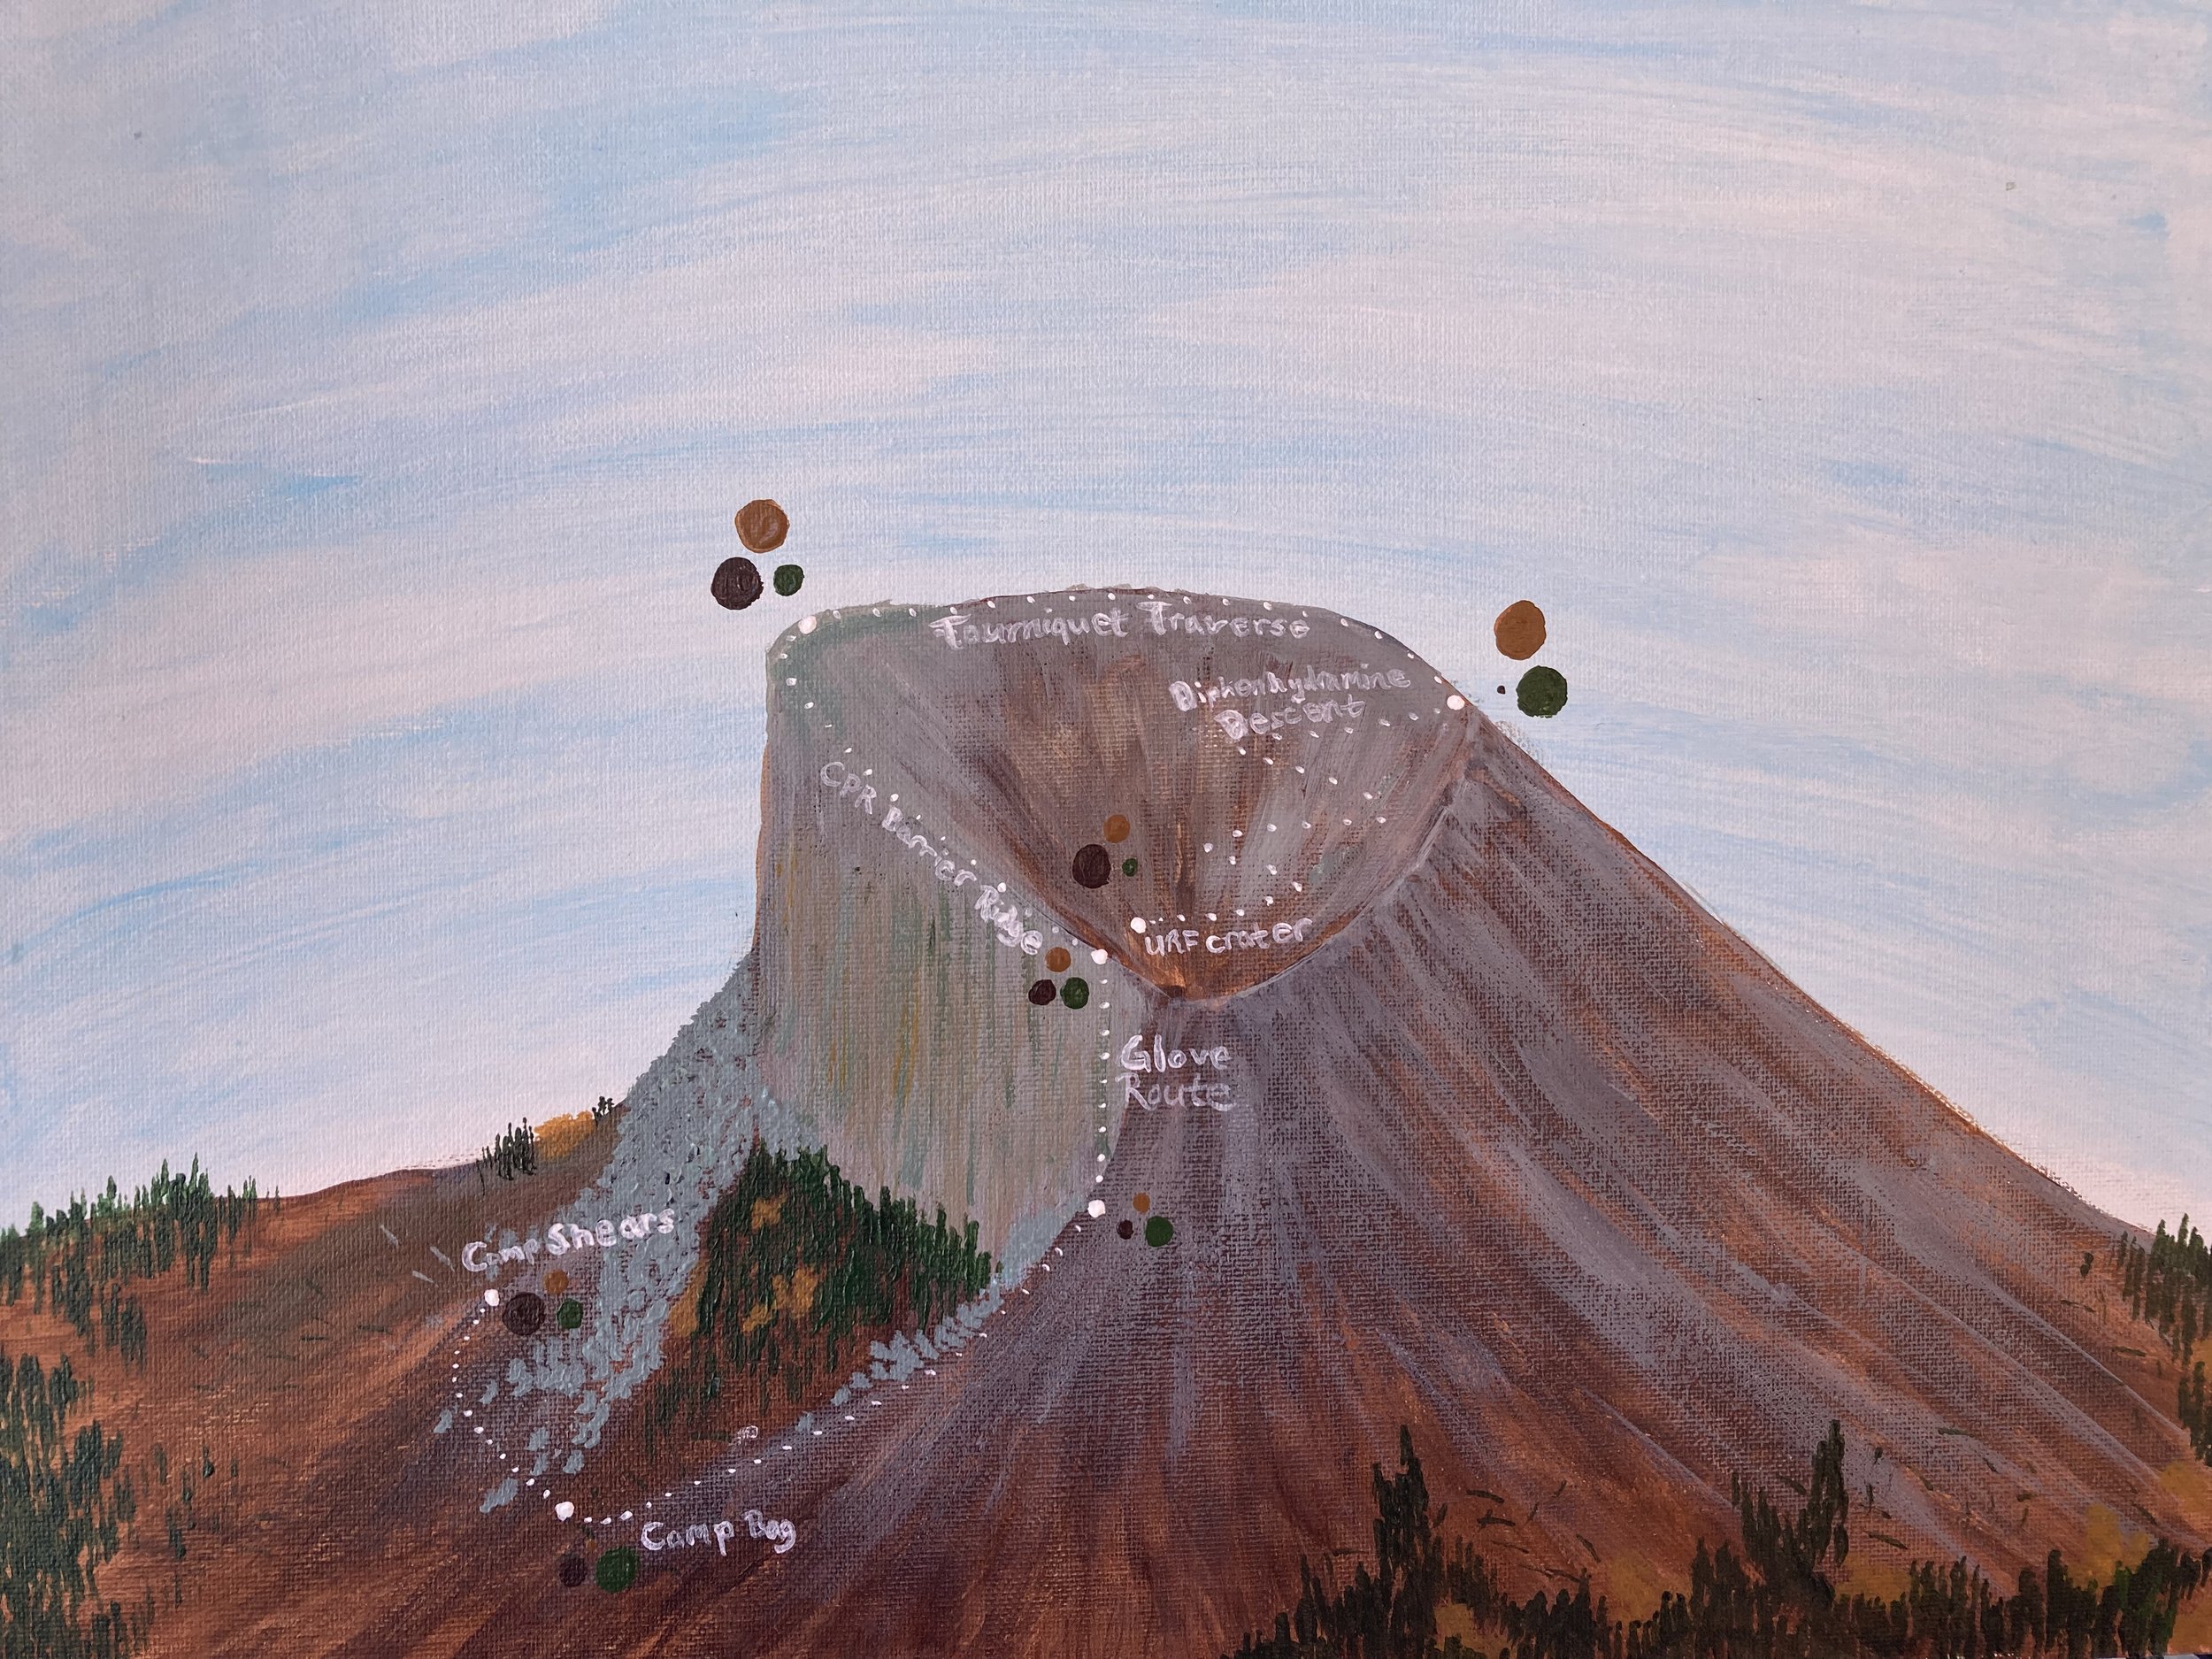  A painting of a volcano with a hiking path with points along the path representing different points in a design process.  